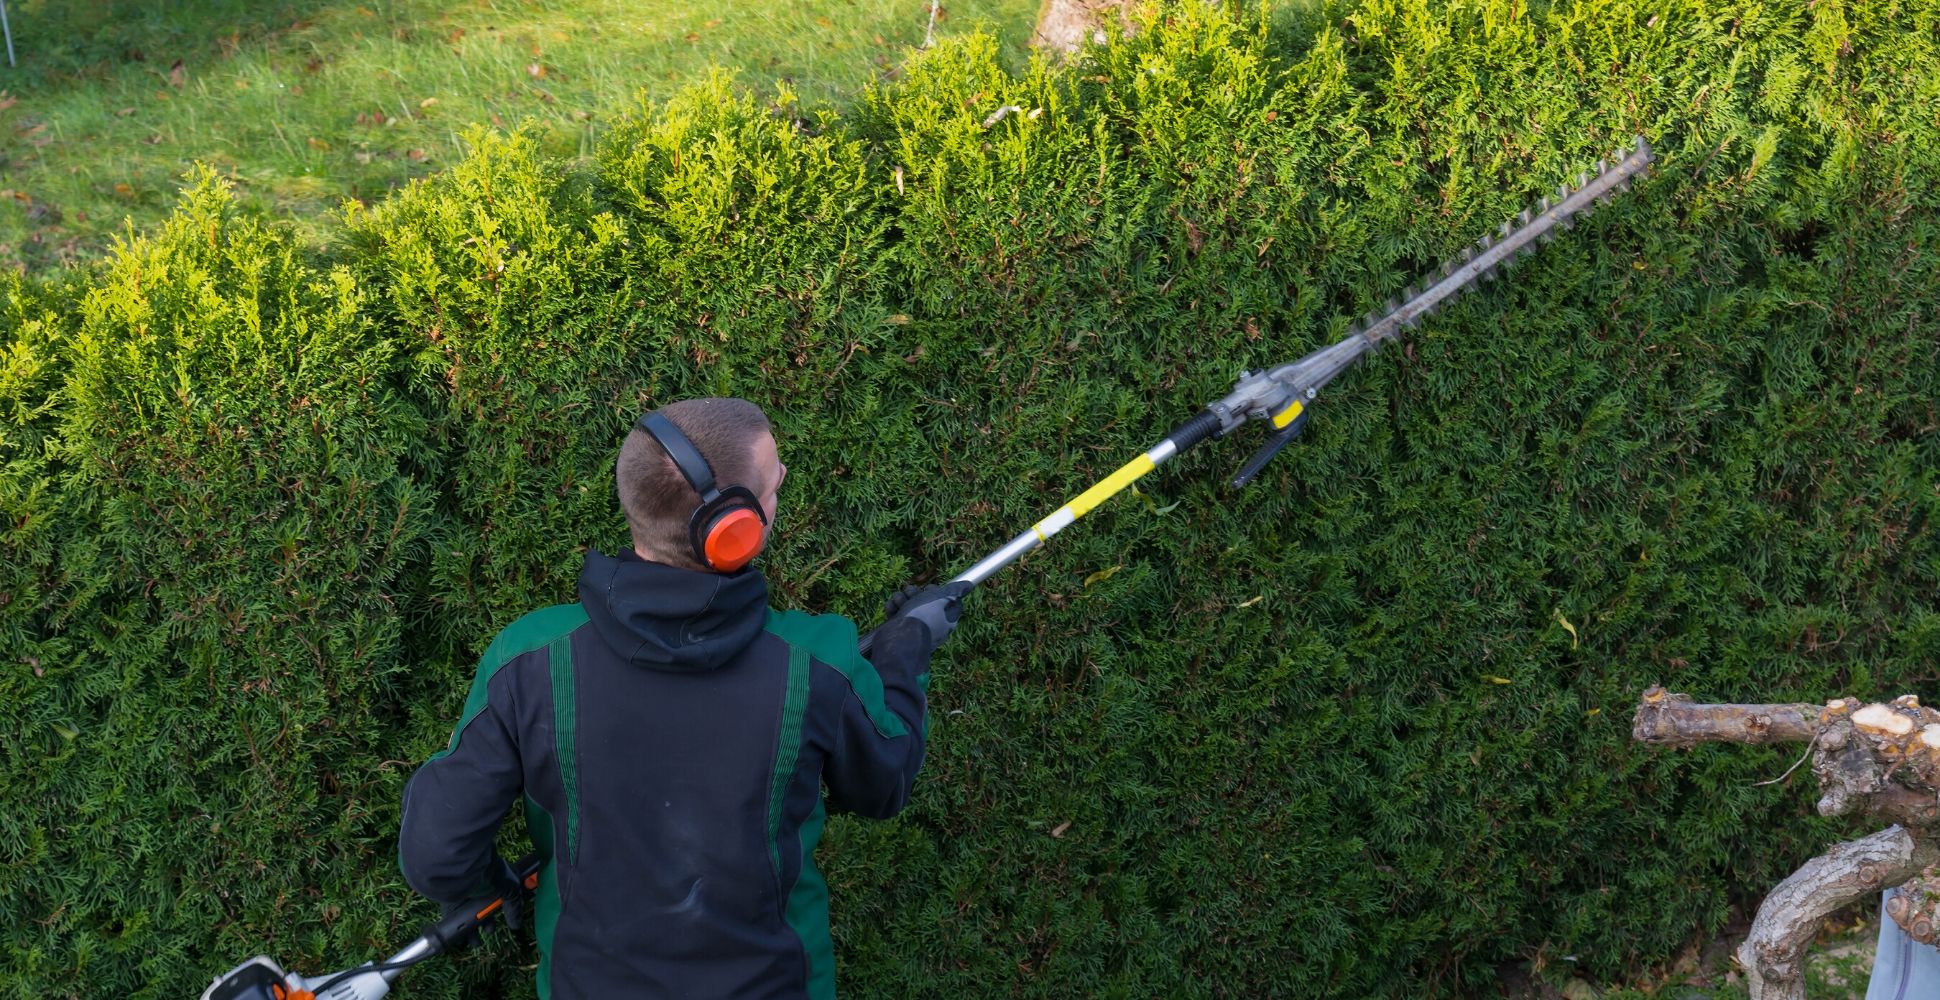 pole hedge trimmers